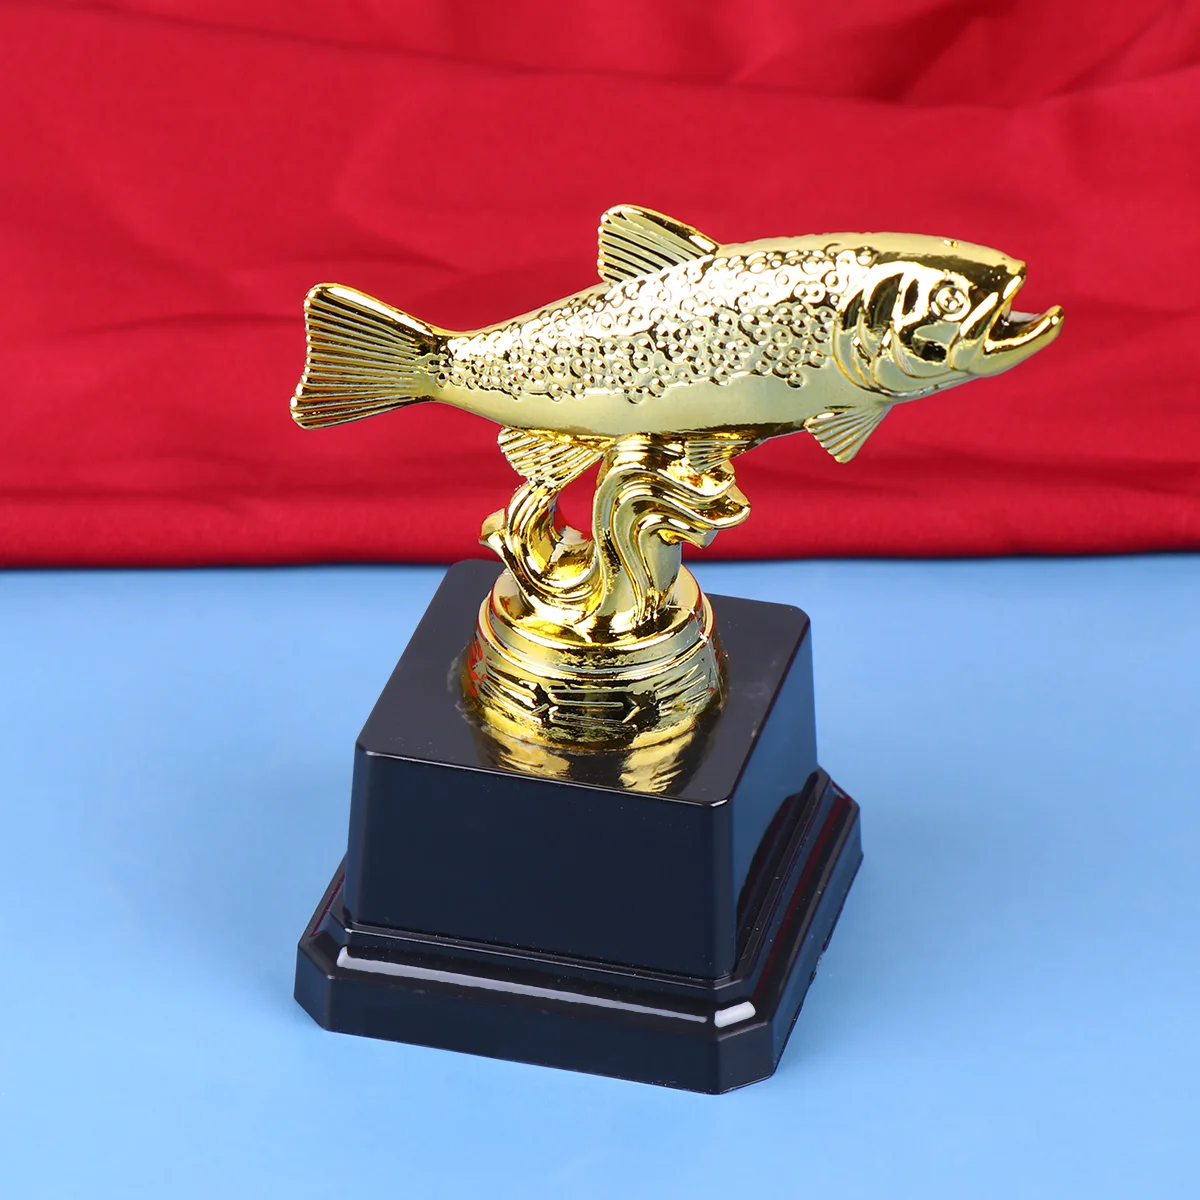 Trophy Award Cup Kids Trophies Fish Prize Fishing Party Winning Gold  Statues Football Basketball Achievement Creative Favor